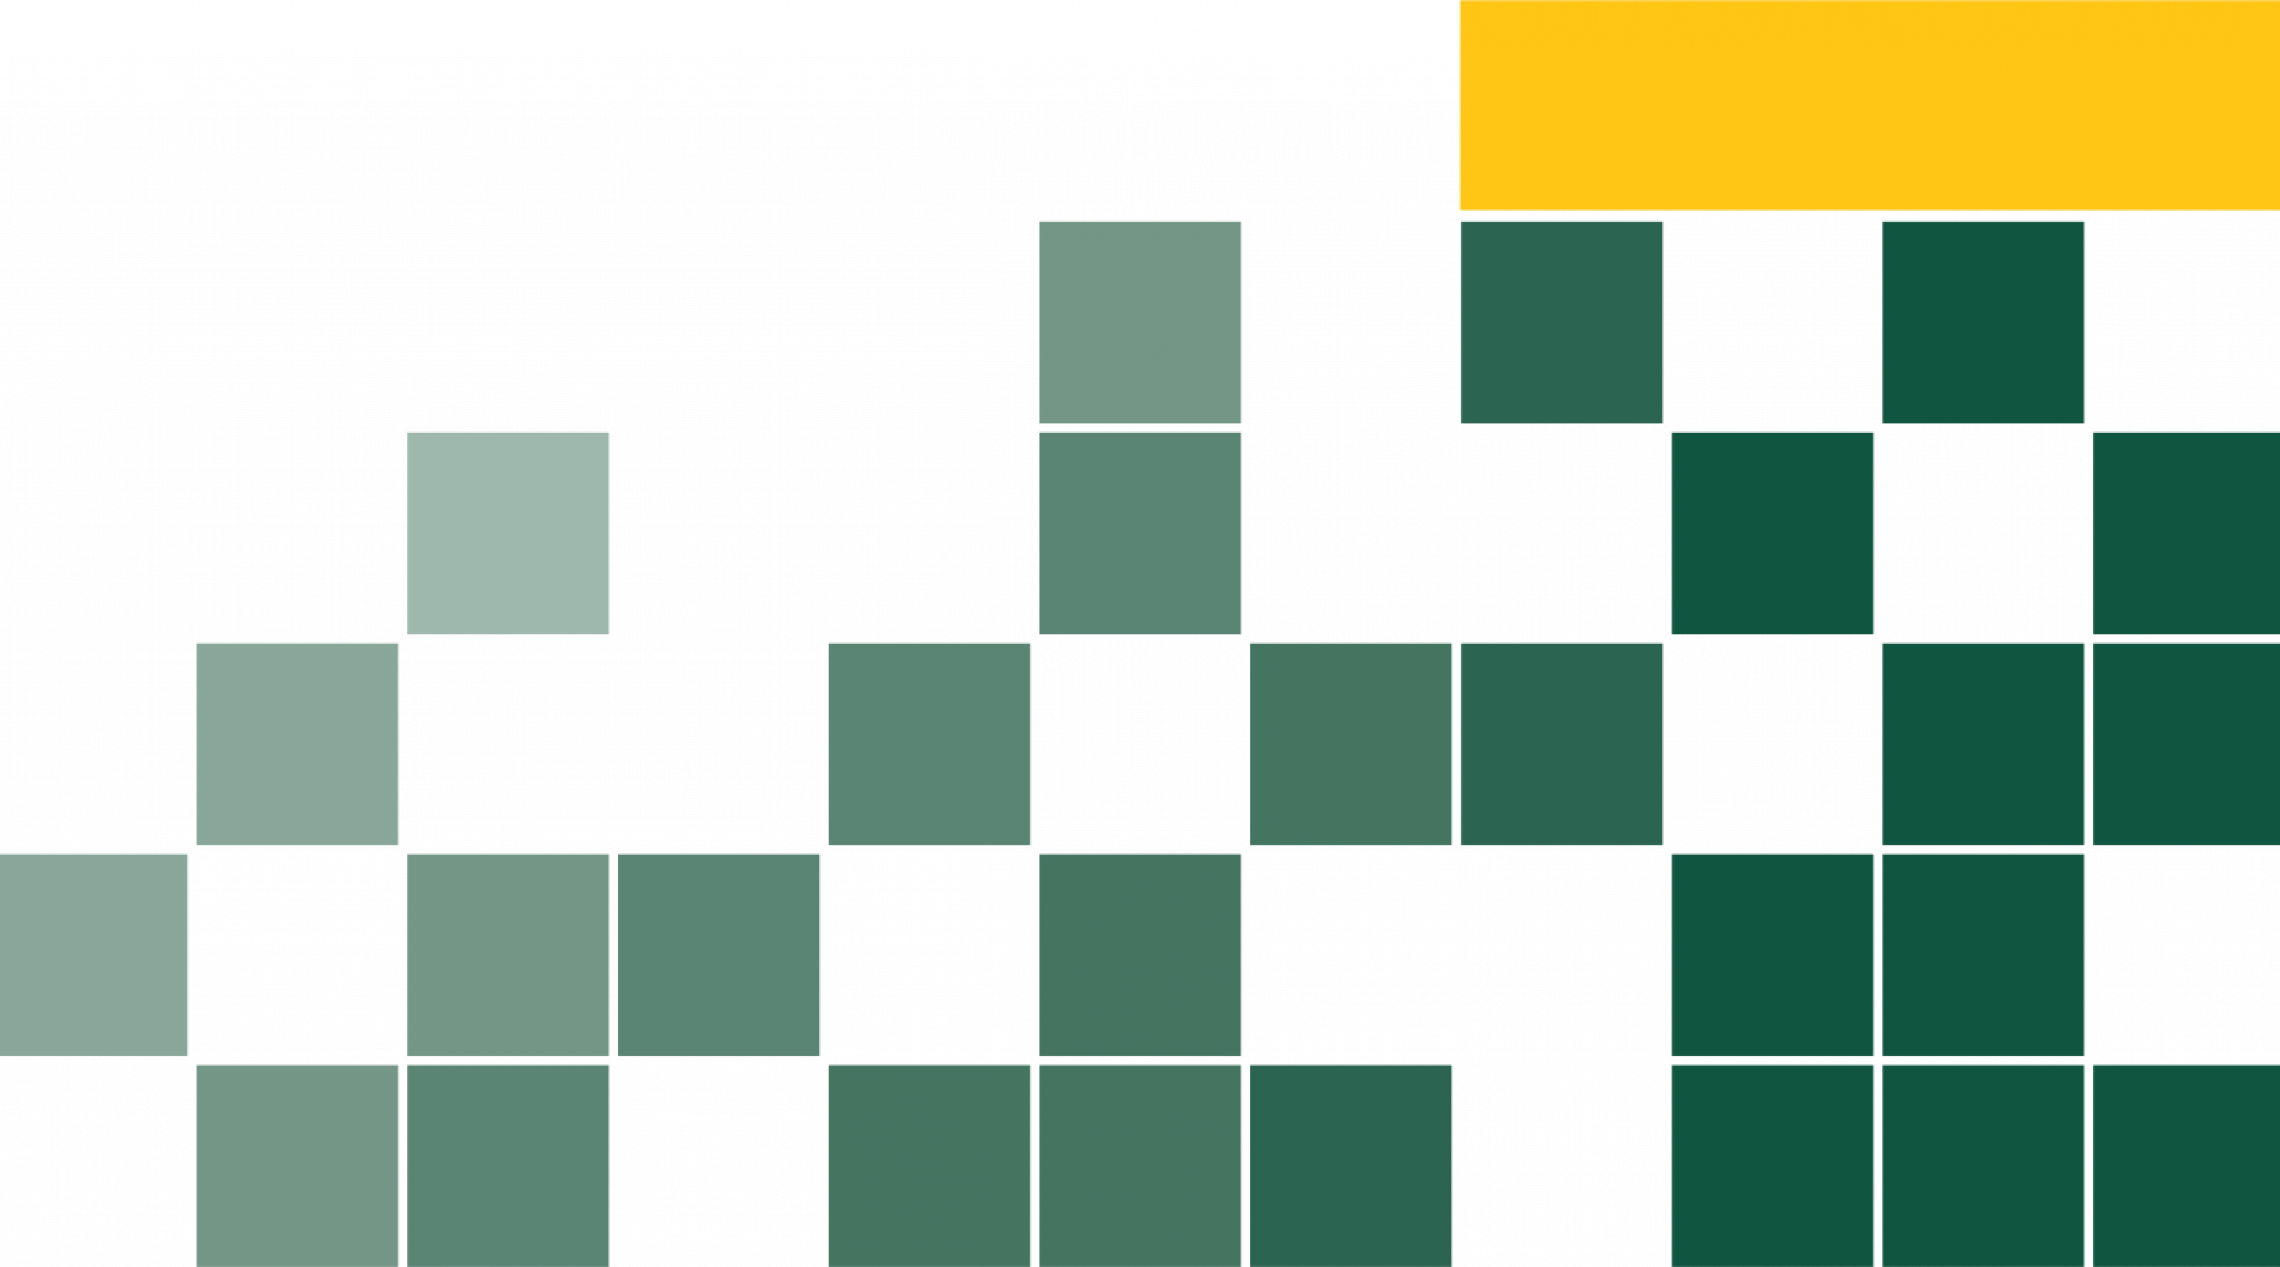 A graphic with several dark green blocks interspersed with light gray blocks. A narrow, gold rectangle tops the right side of the image.